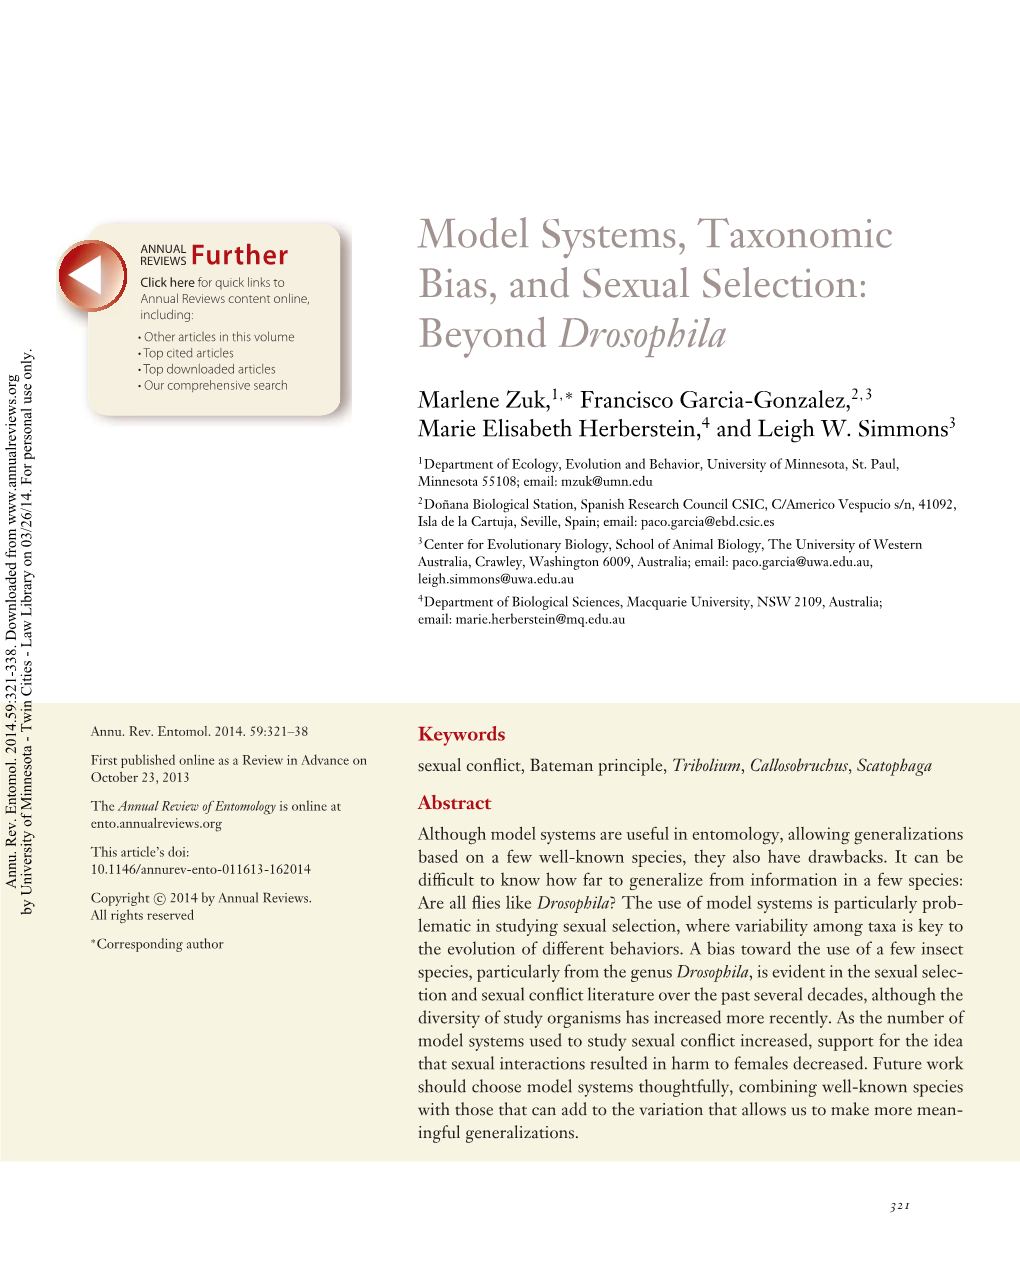 Model Systems, Taxonomic Bias, and Sexual Selection: Beyond Drosophila